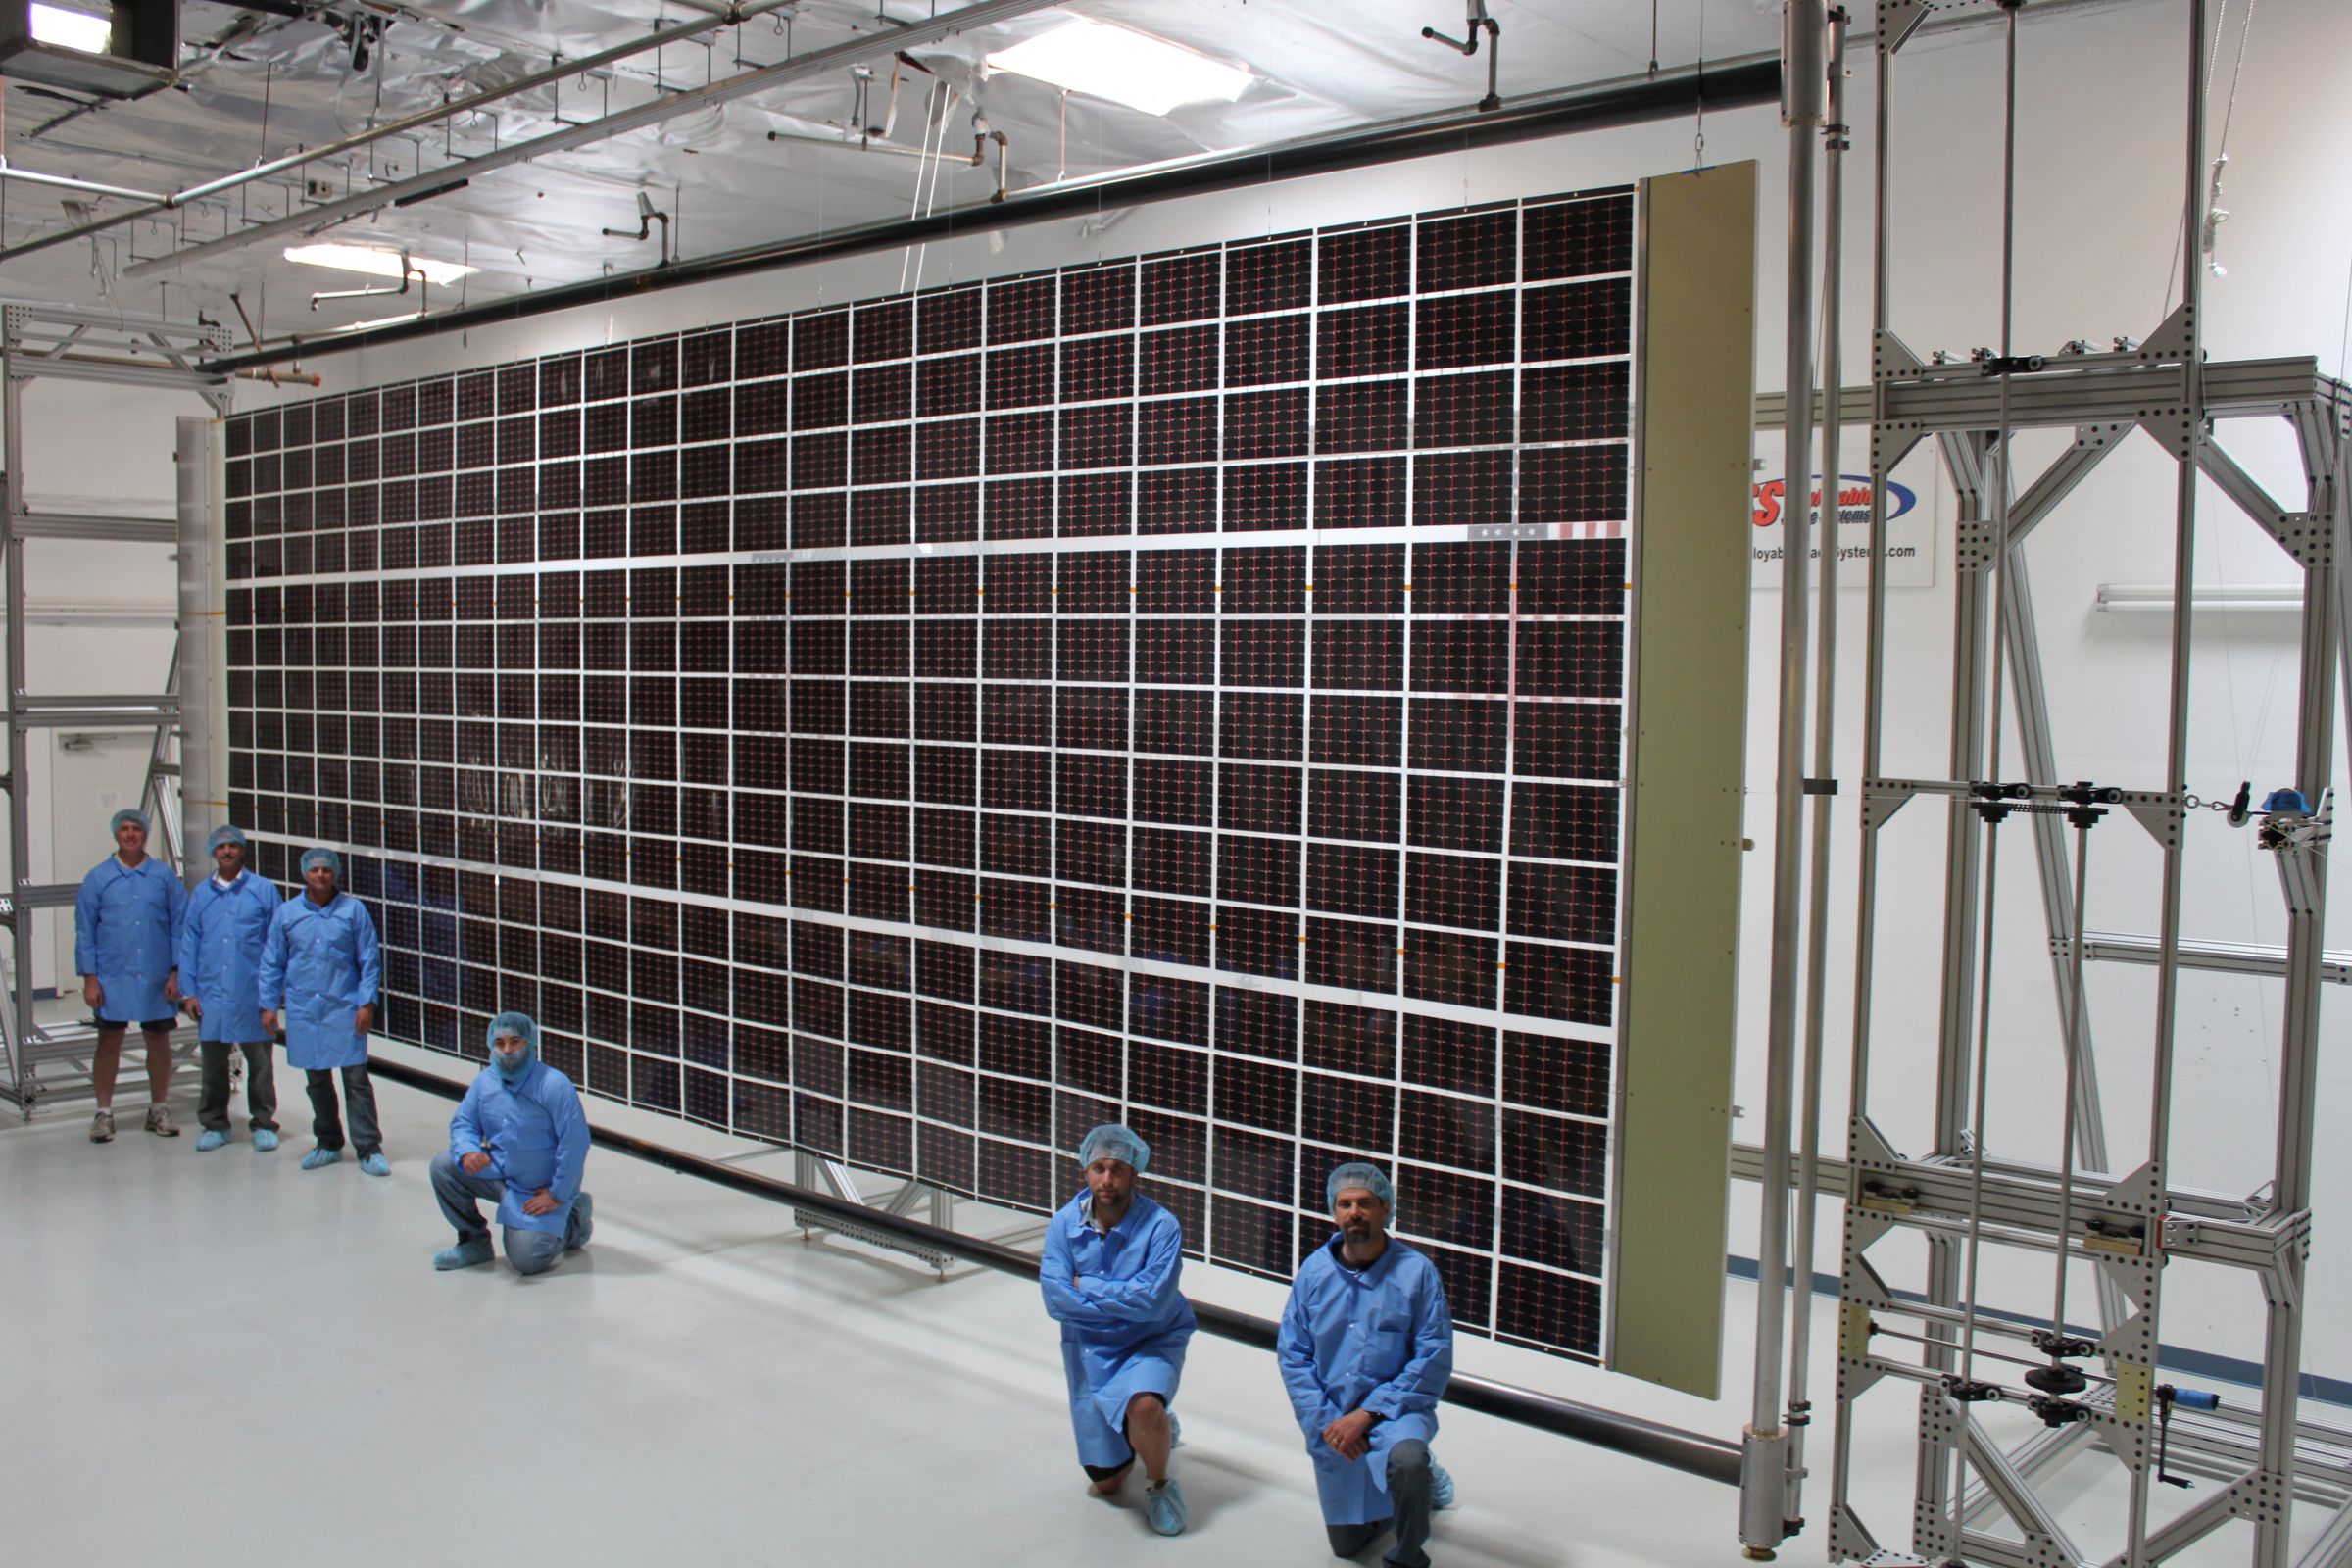 The Roll Out Solar Array (ROSA) undergoing testing.